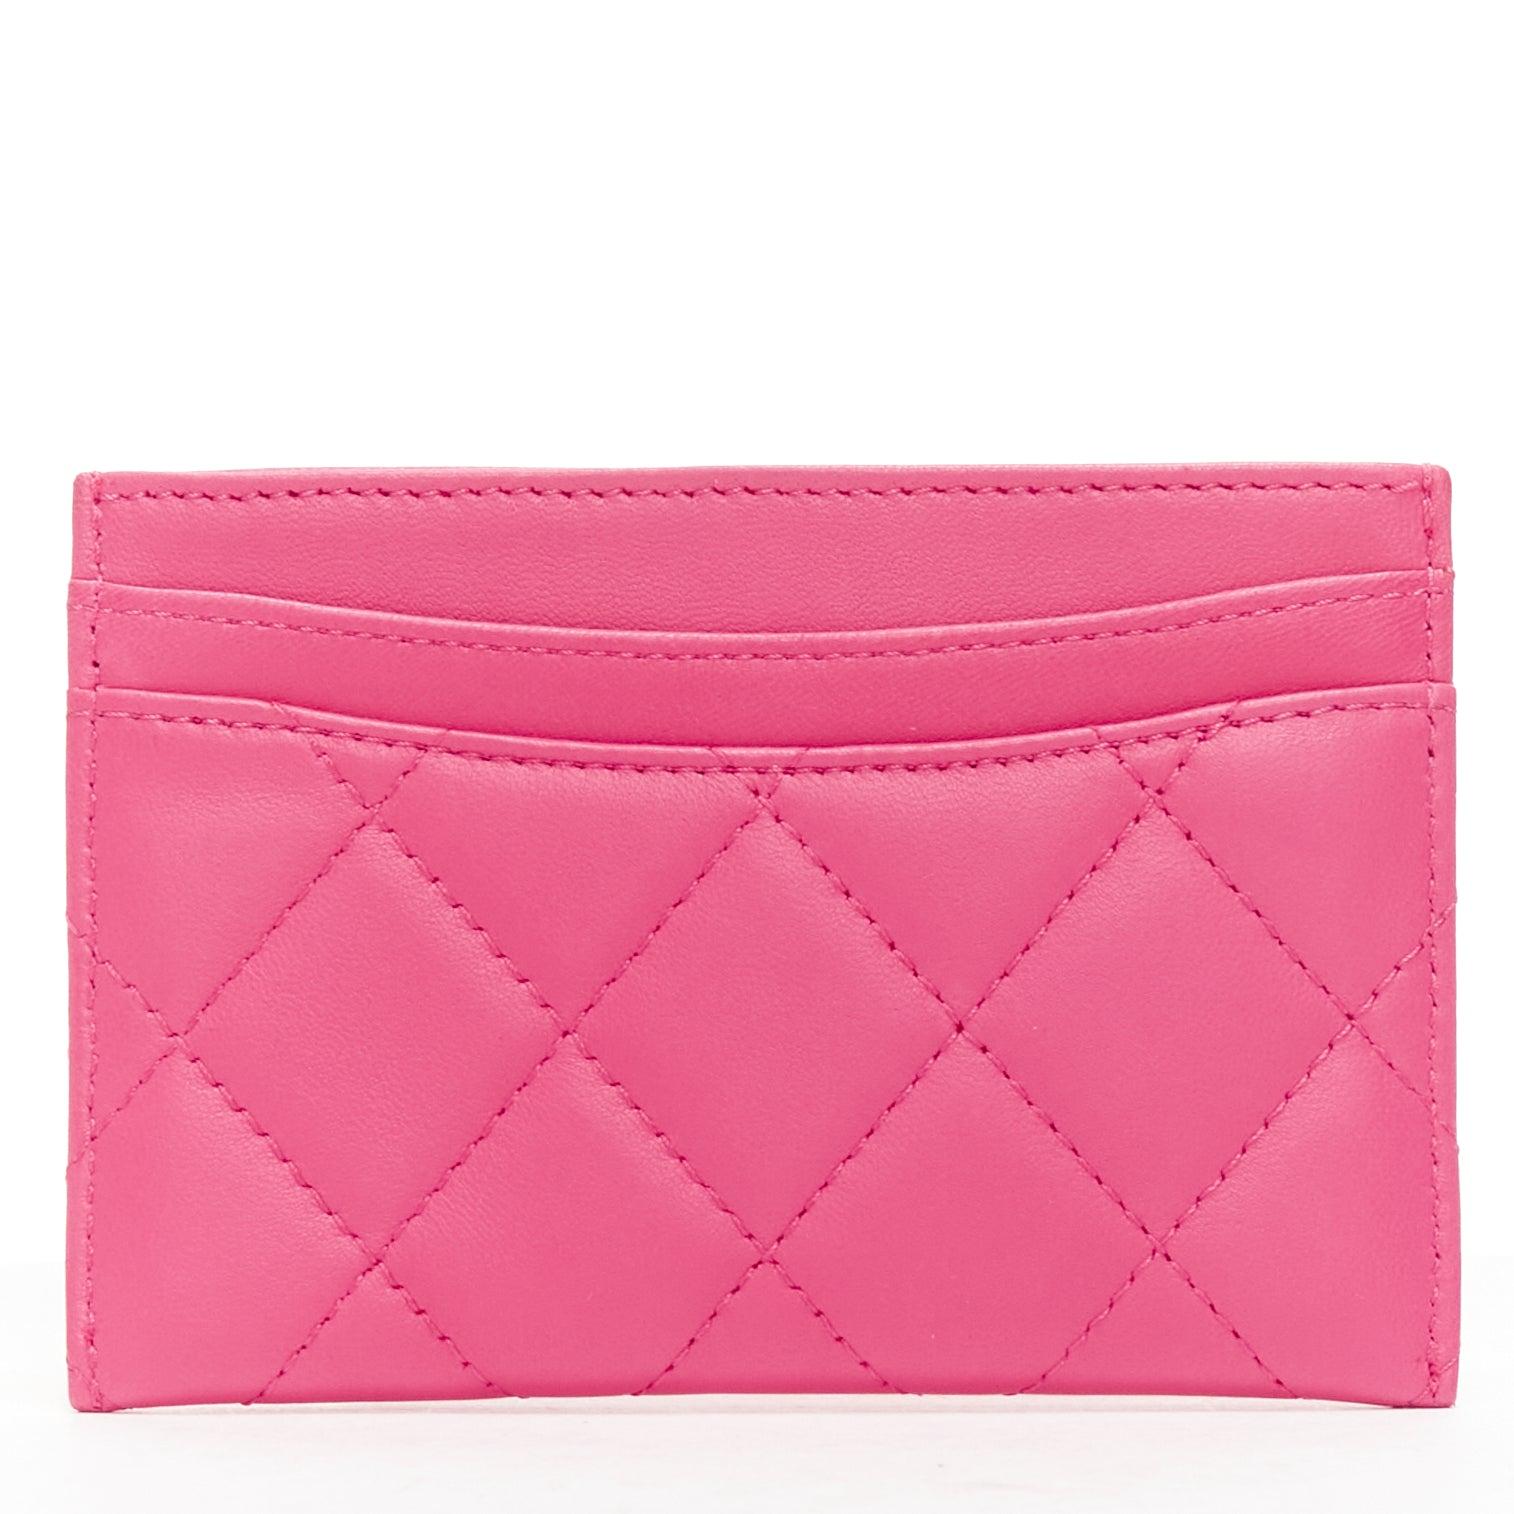 CHANEL bright pink smooth leather CC logo quilted cardholder
Reference: AAWC/A00992
Brand: Chanel
Material: Leather
Color: Pink
Pattern: Solid
Lining: Nude Fabric
Extra Details: Quilted at backside.
Made in: Italy

CONDITION:
Condition: Excellent,